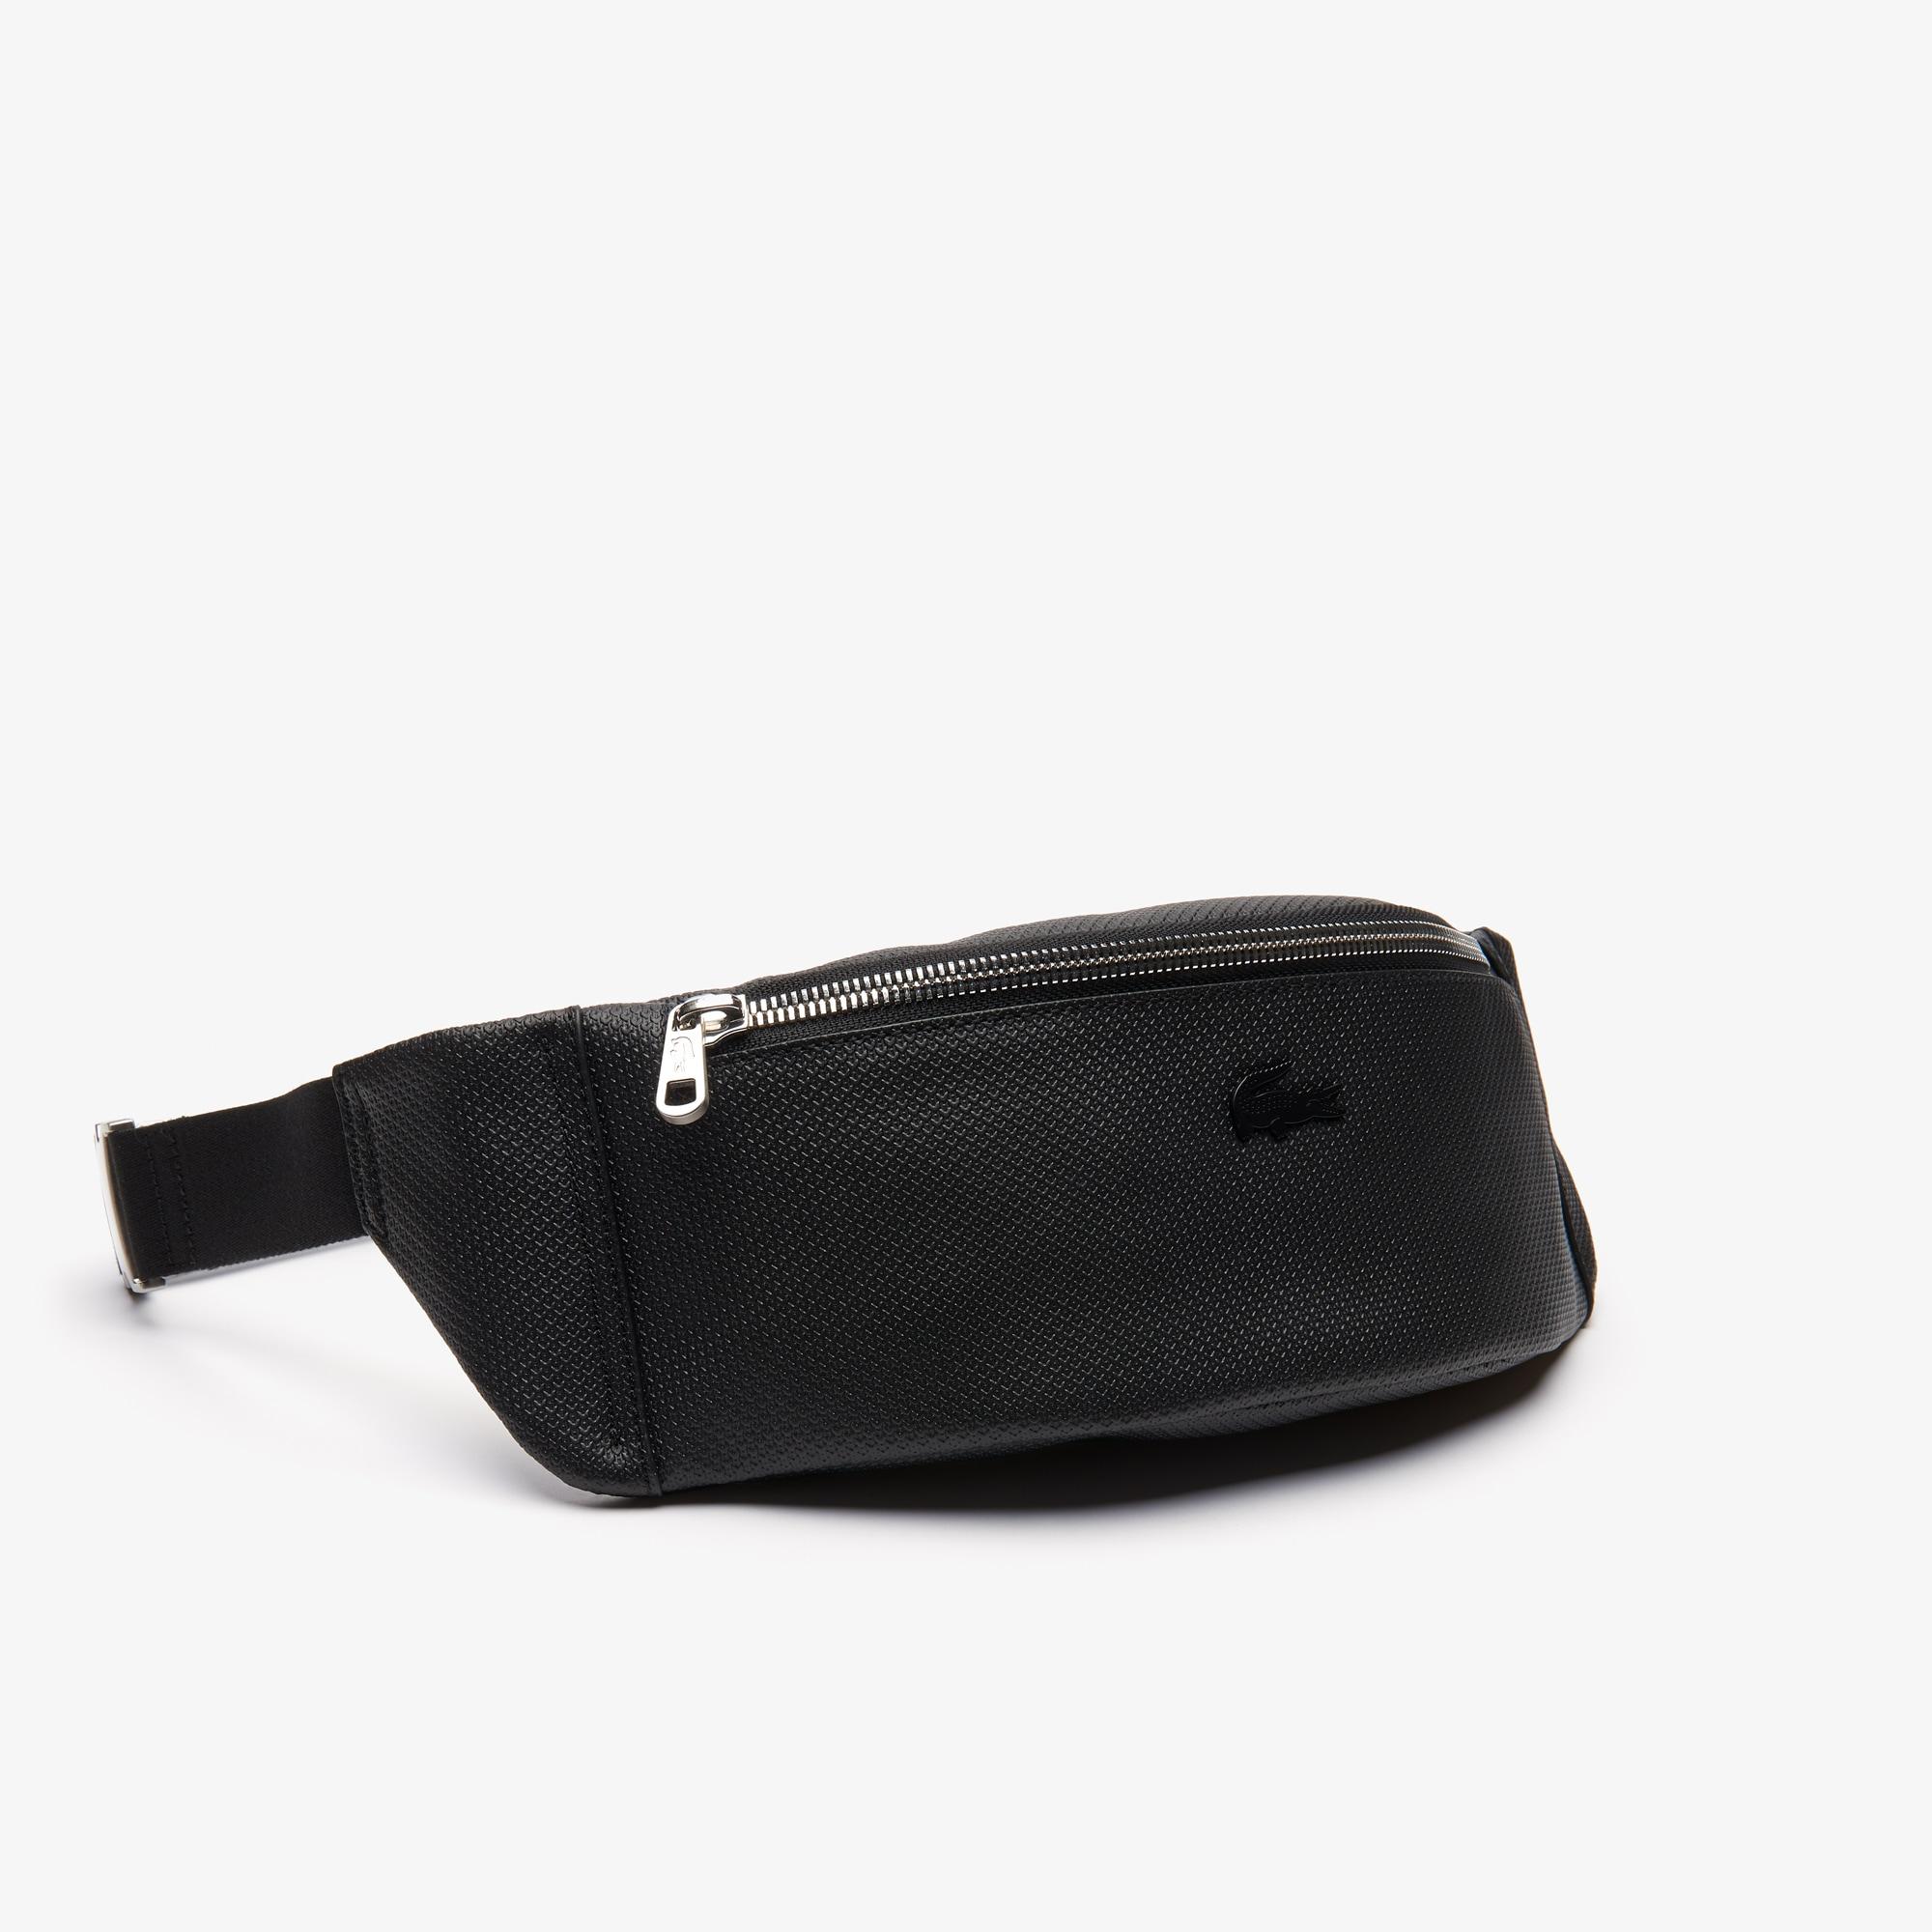 Lacoste Chantaco Soft Leather Bum Bag in Black for Men - Lyst